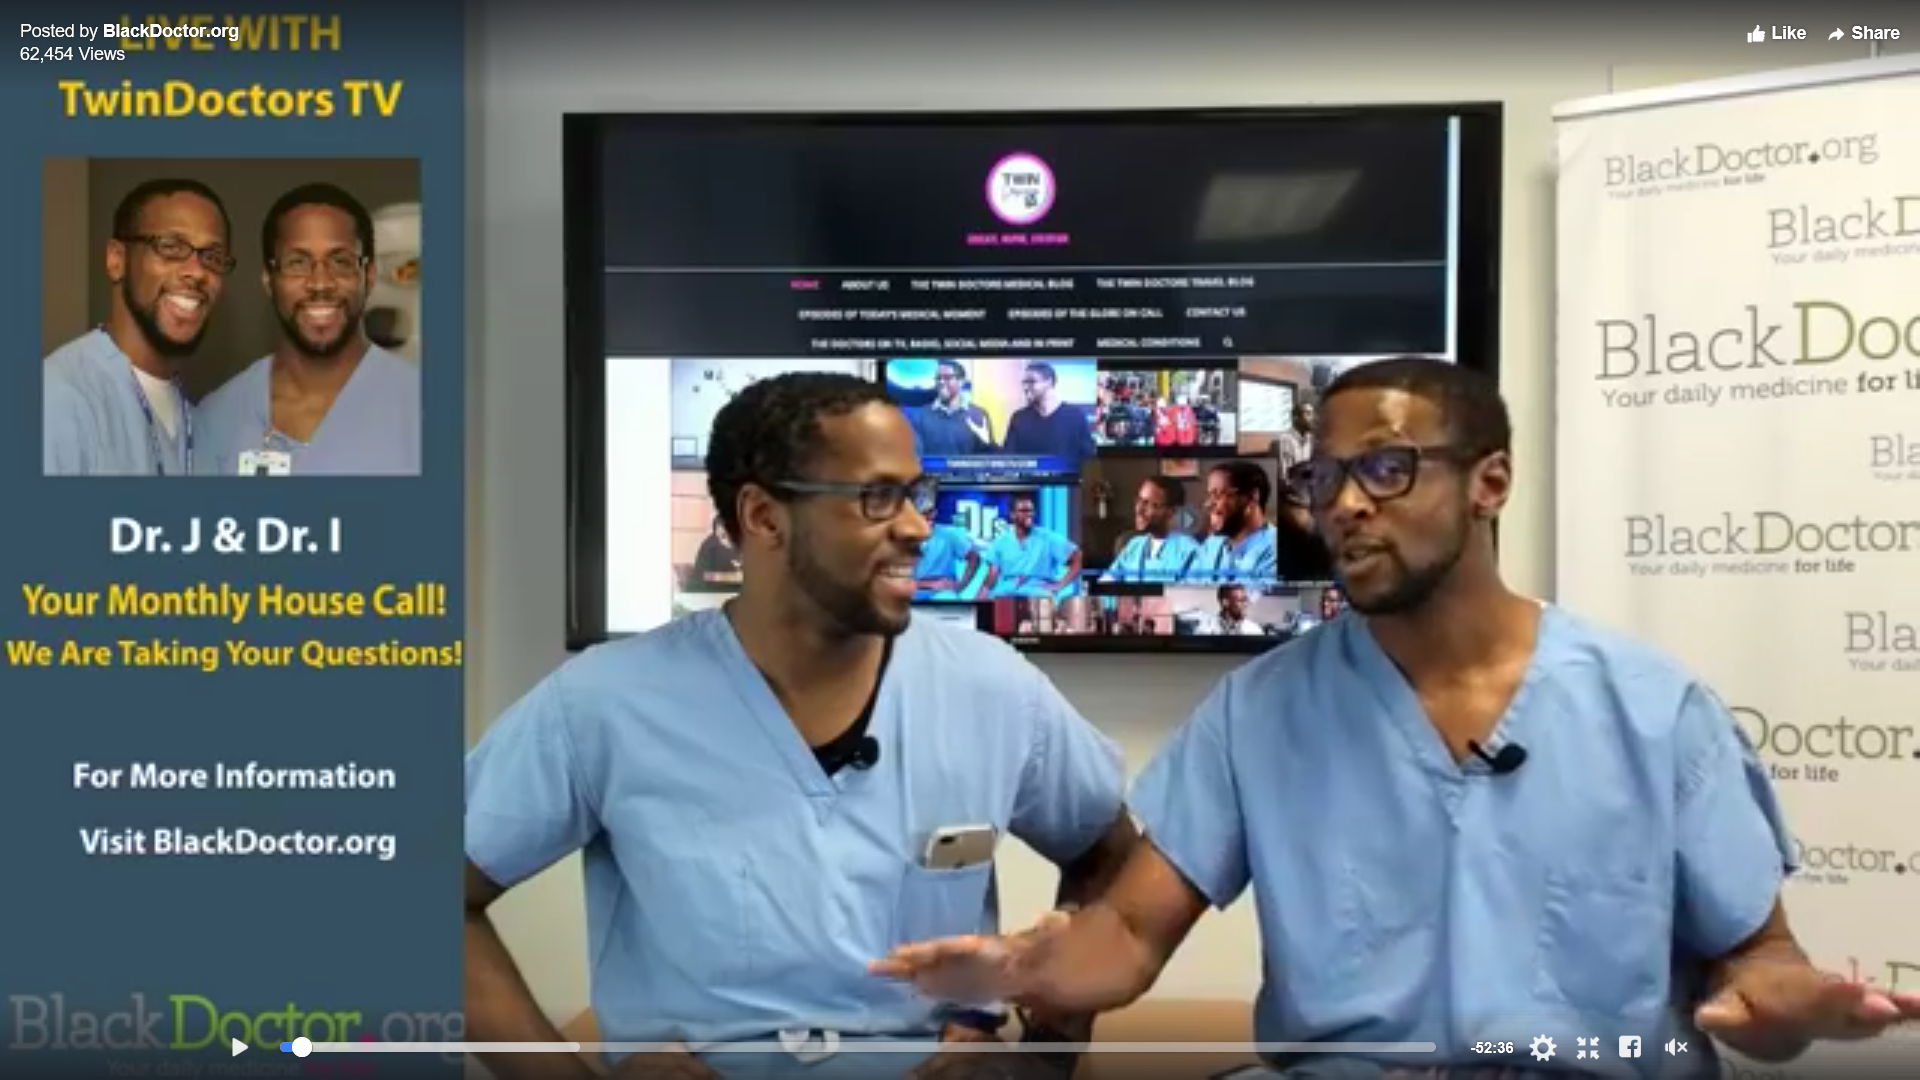 Medical Q&A With BlackDoctor.org and Twin Doctors TV